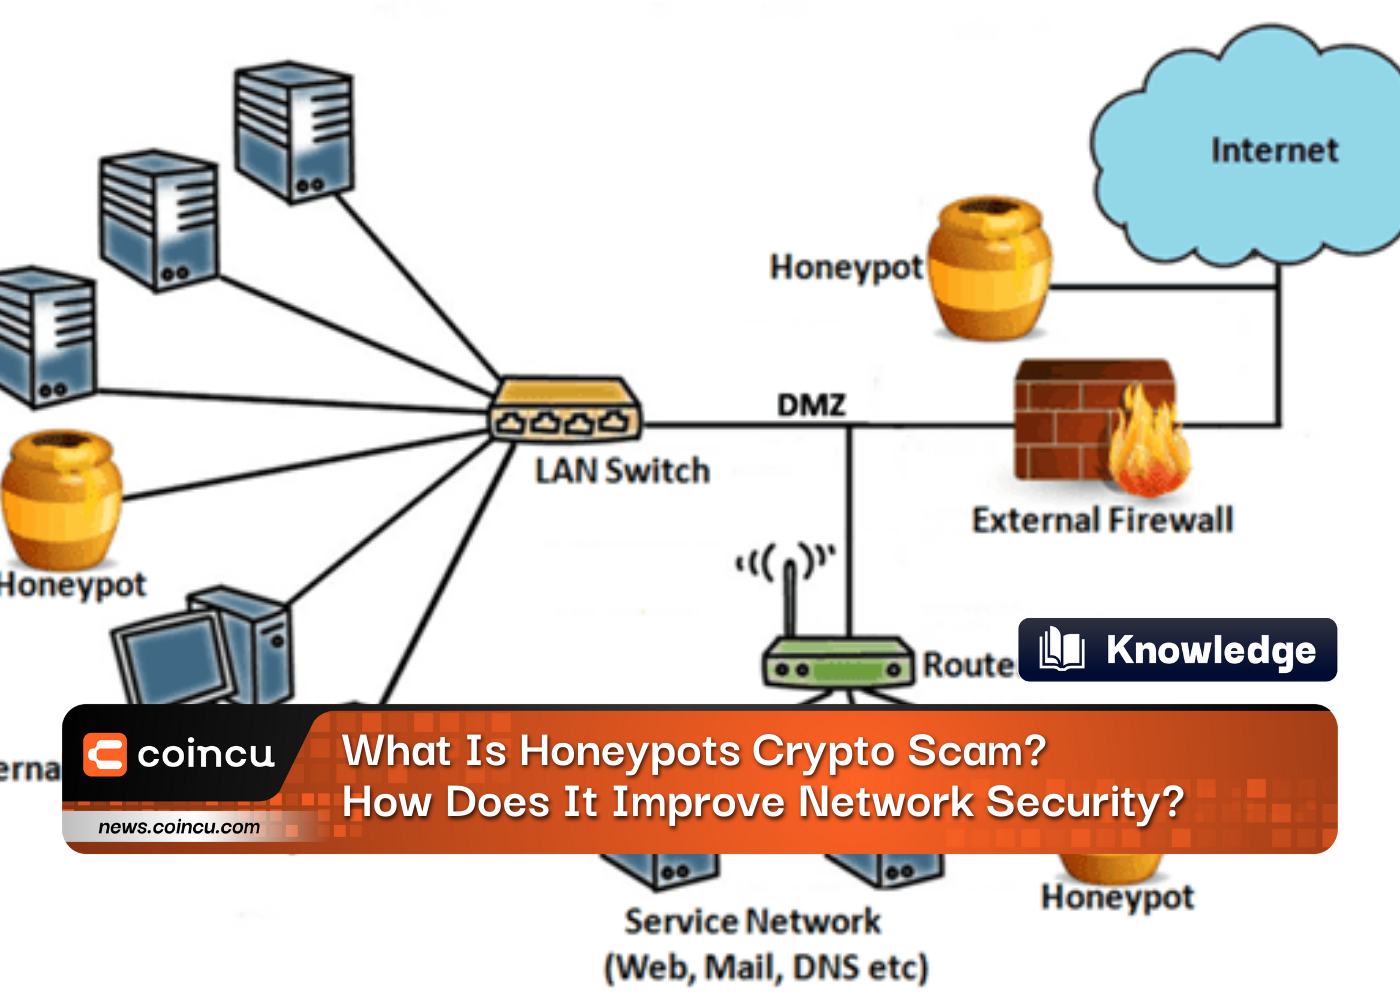 What Is Honeypots Crypto Scam